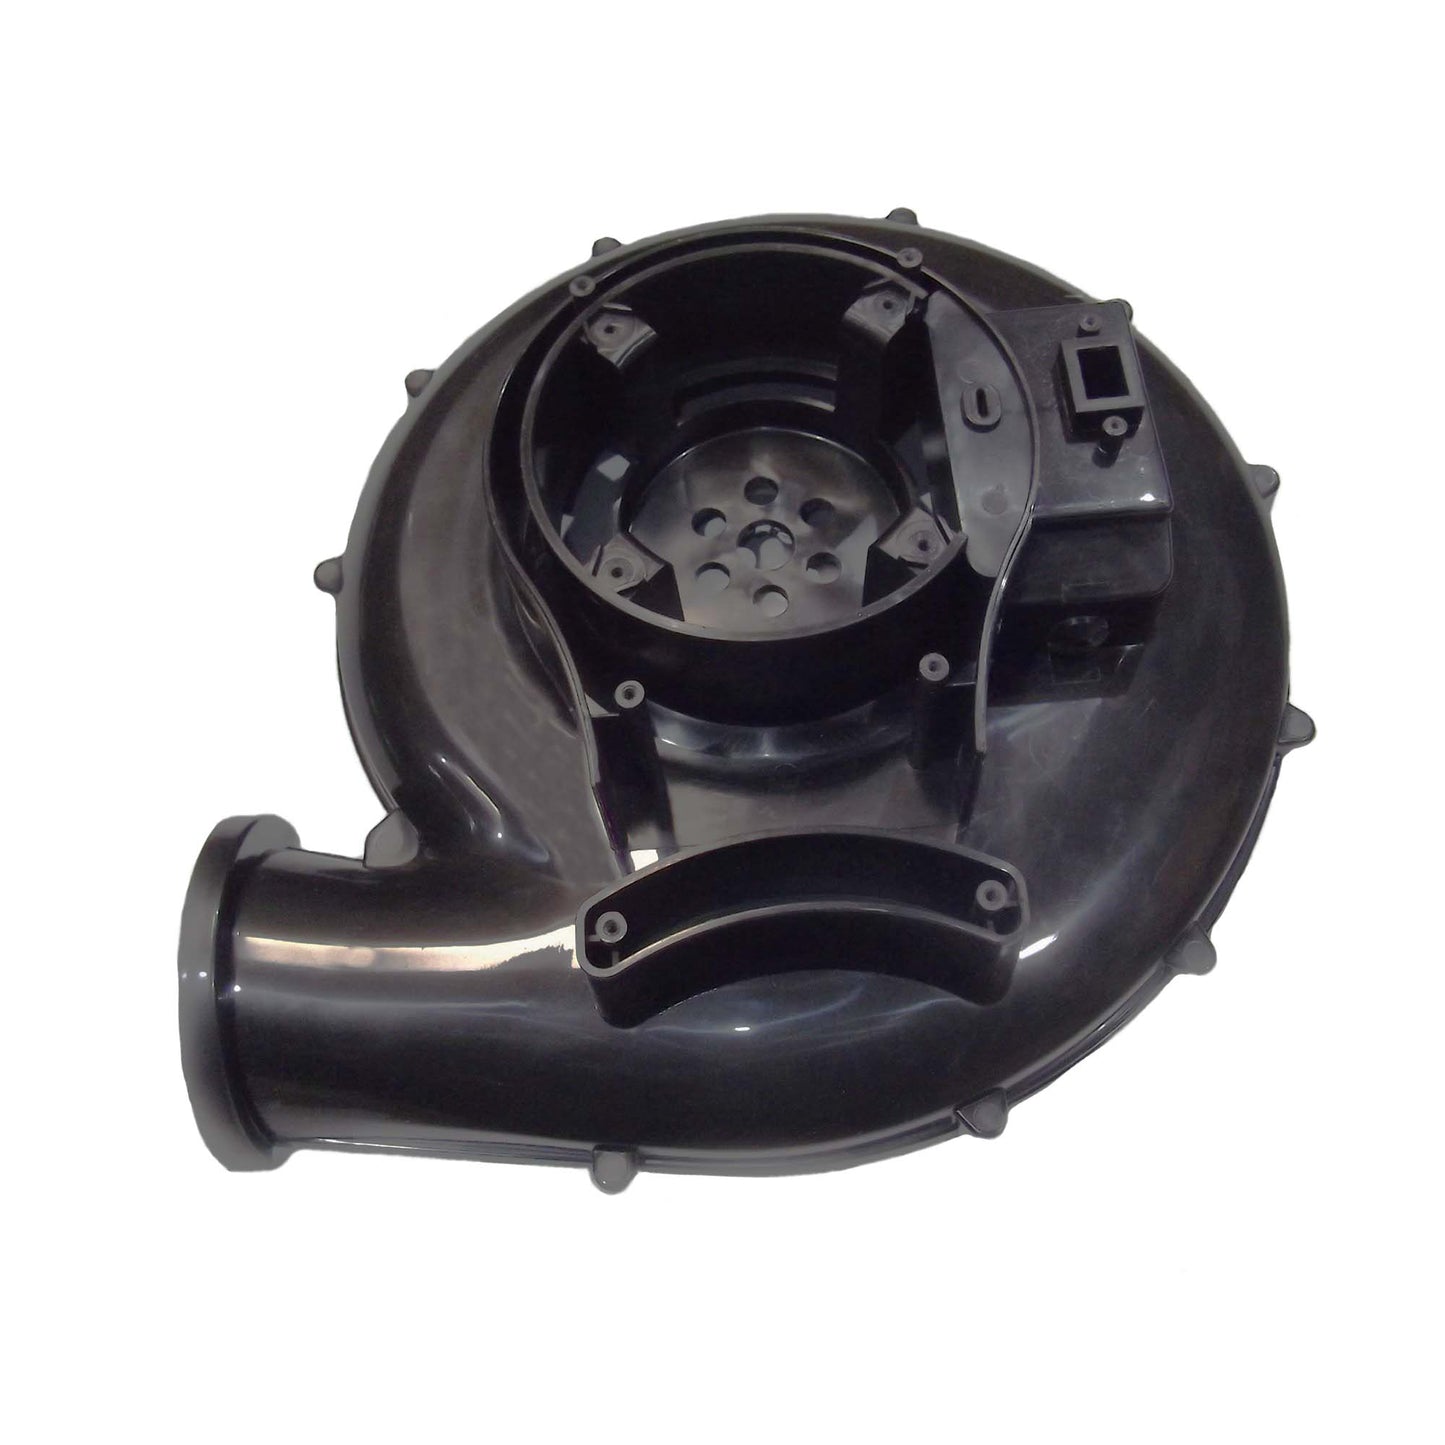 Bottom Cover for BR-35 Inflatable Blower